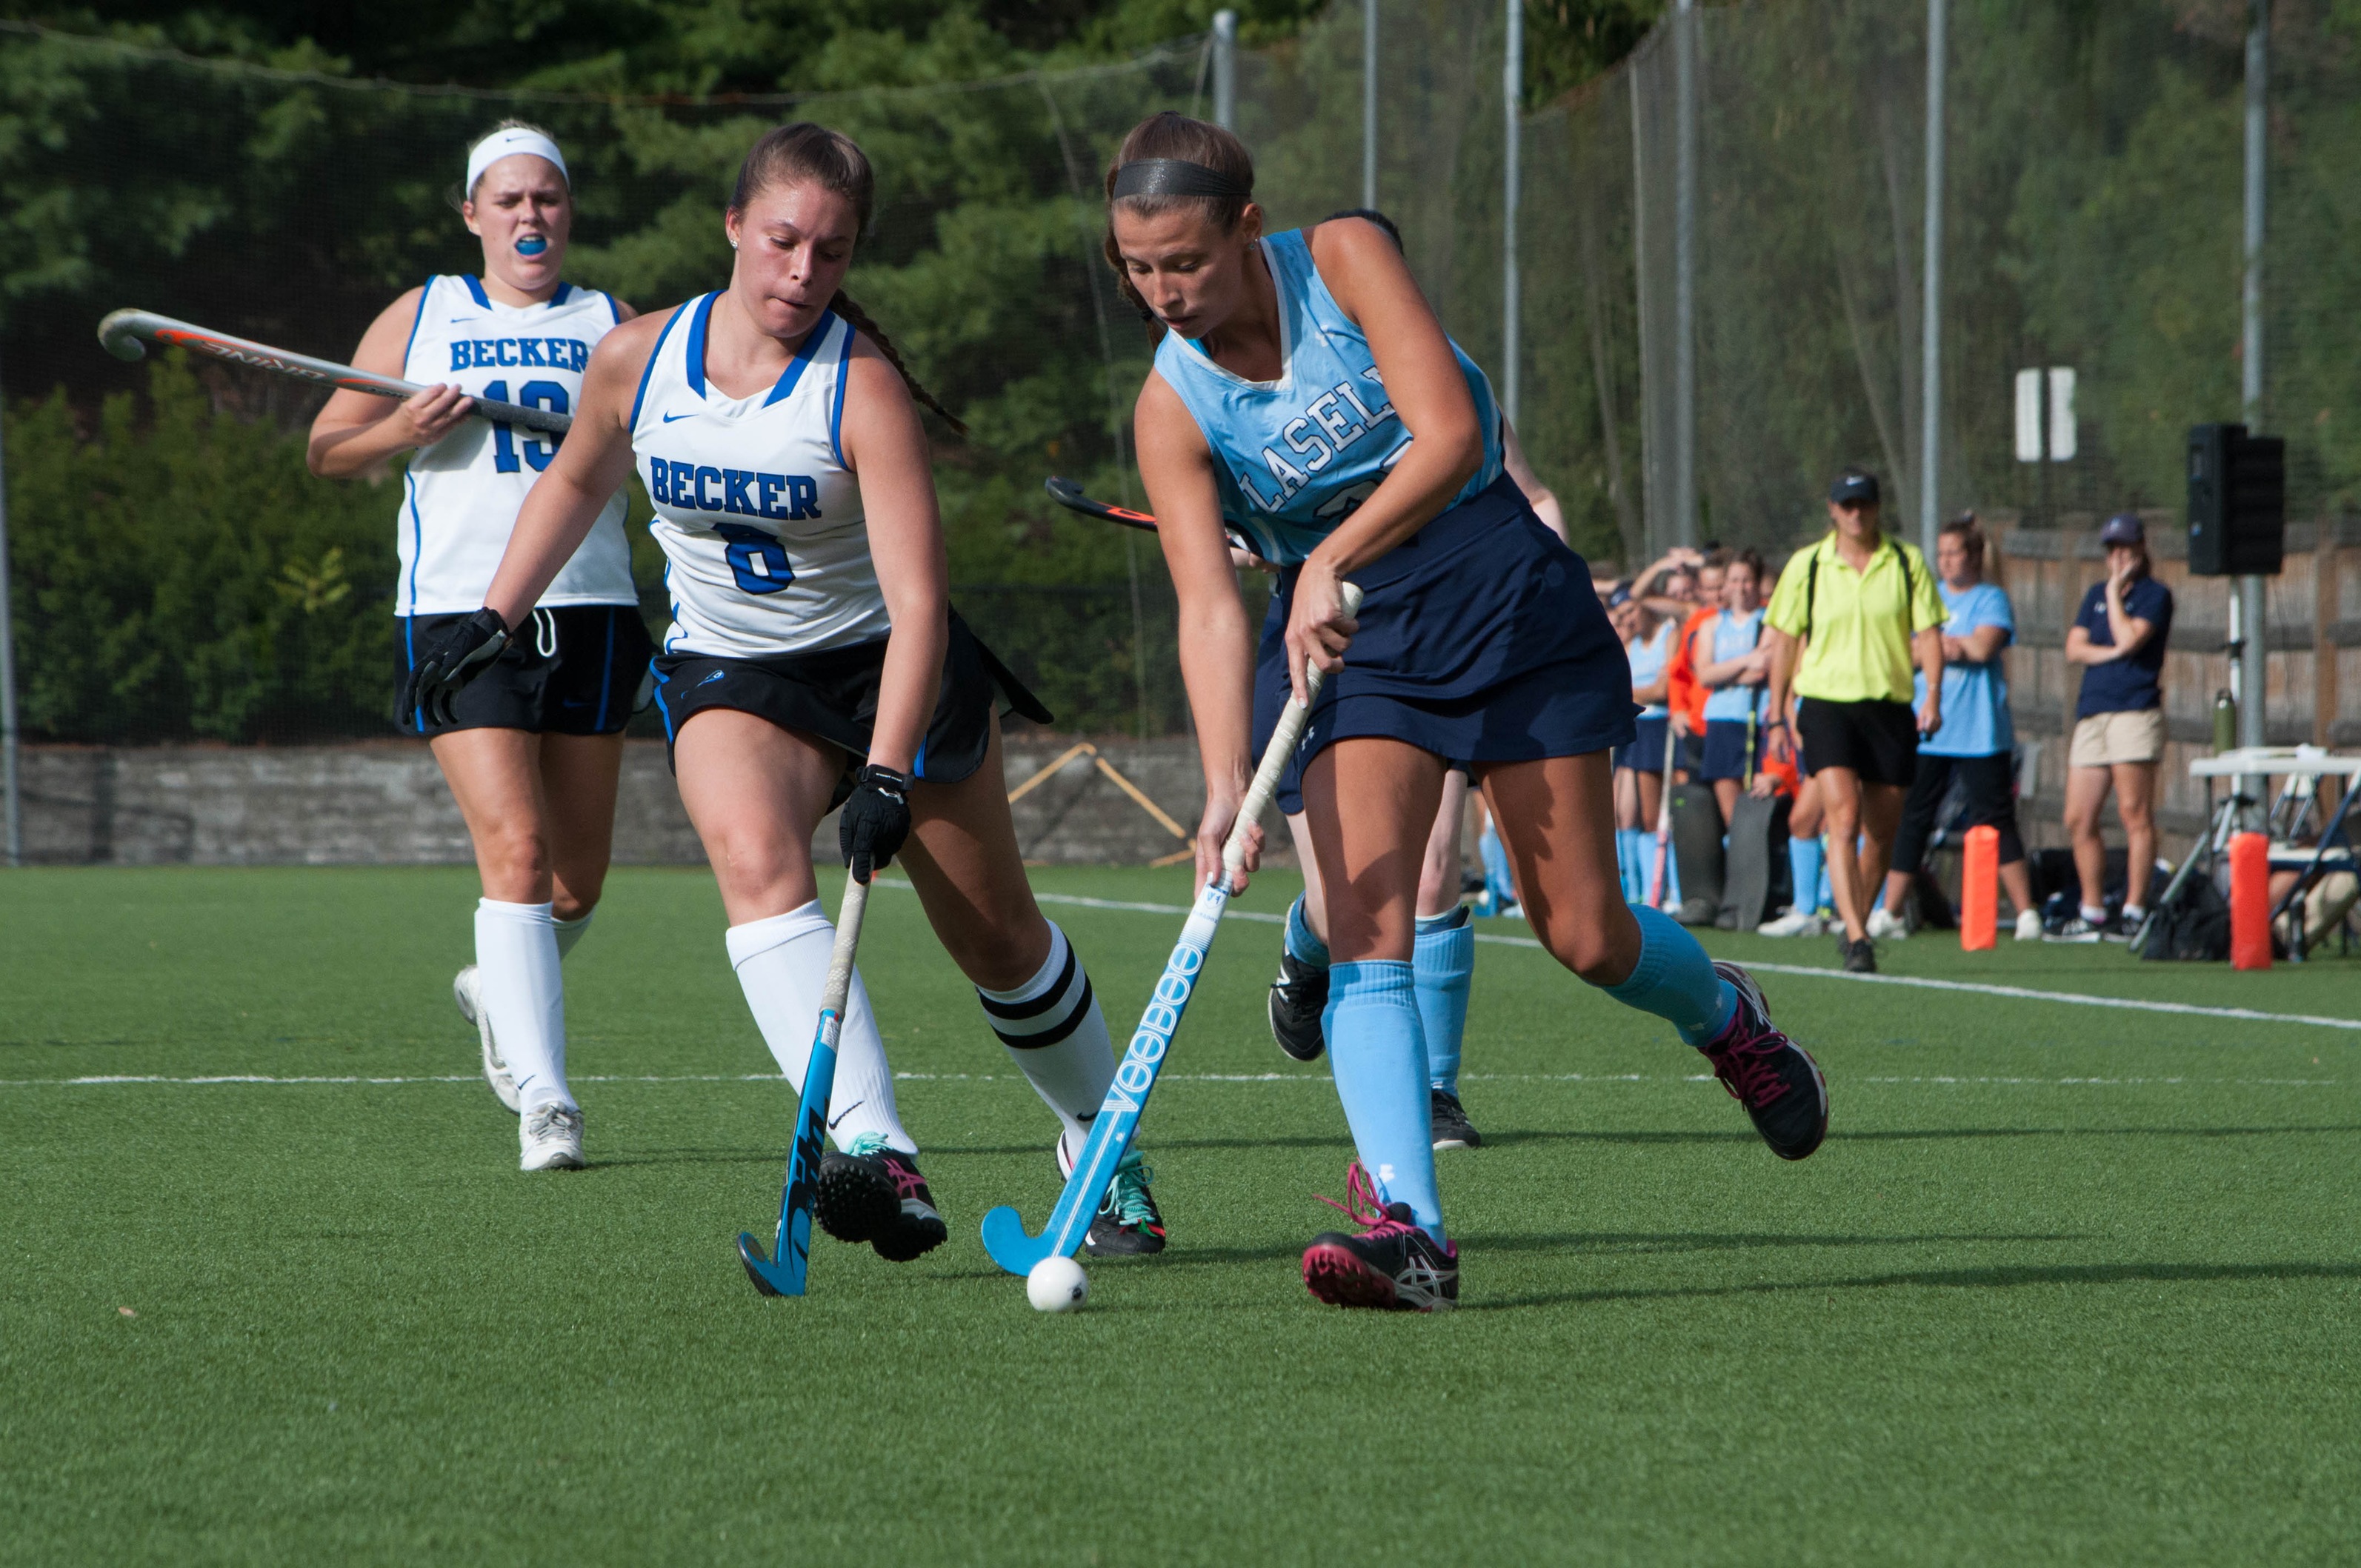 Keene State Edges Lasell in Field Hockey with Overtime Goal